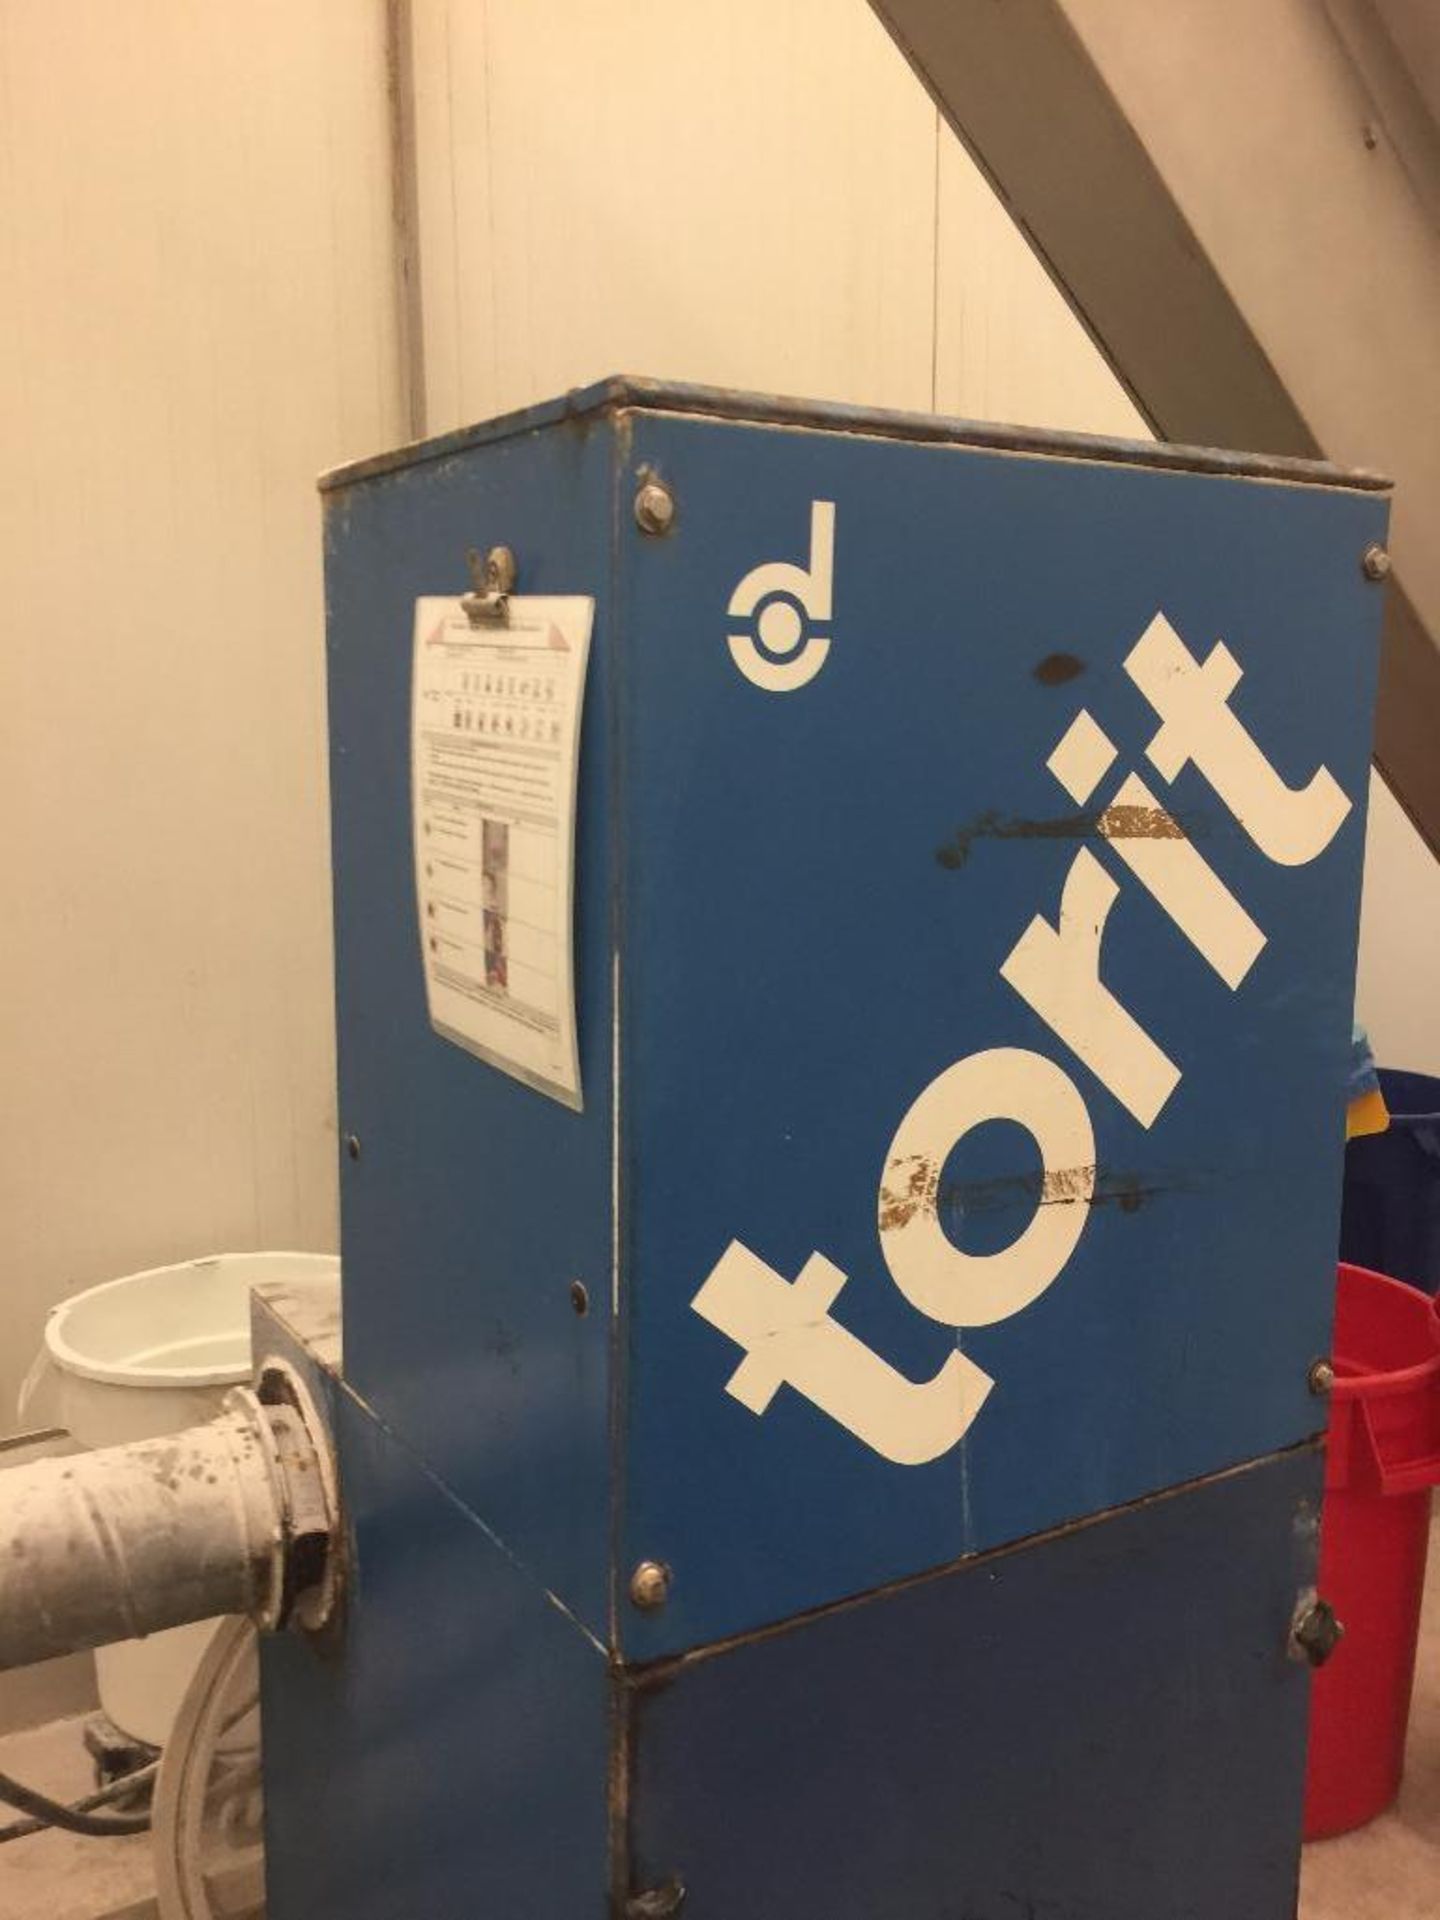 Donaldson Torit dust collector, model 1200, s/n 25-569. - ** Located in Medina, New York ** Rigging - Image 2 of 3